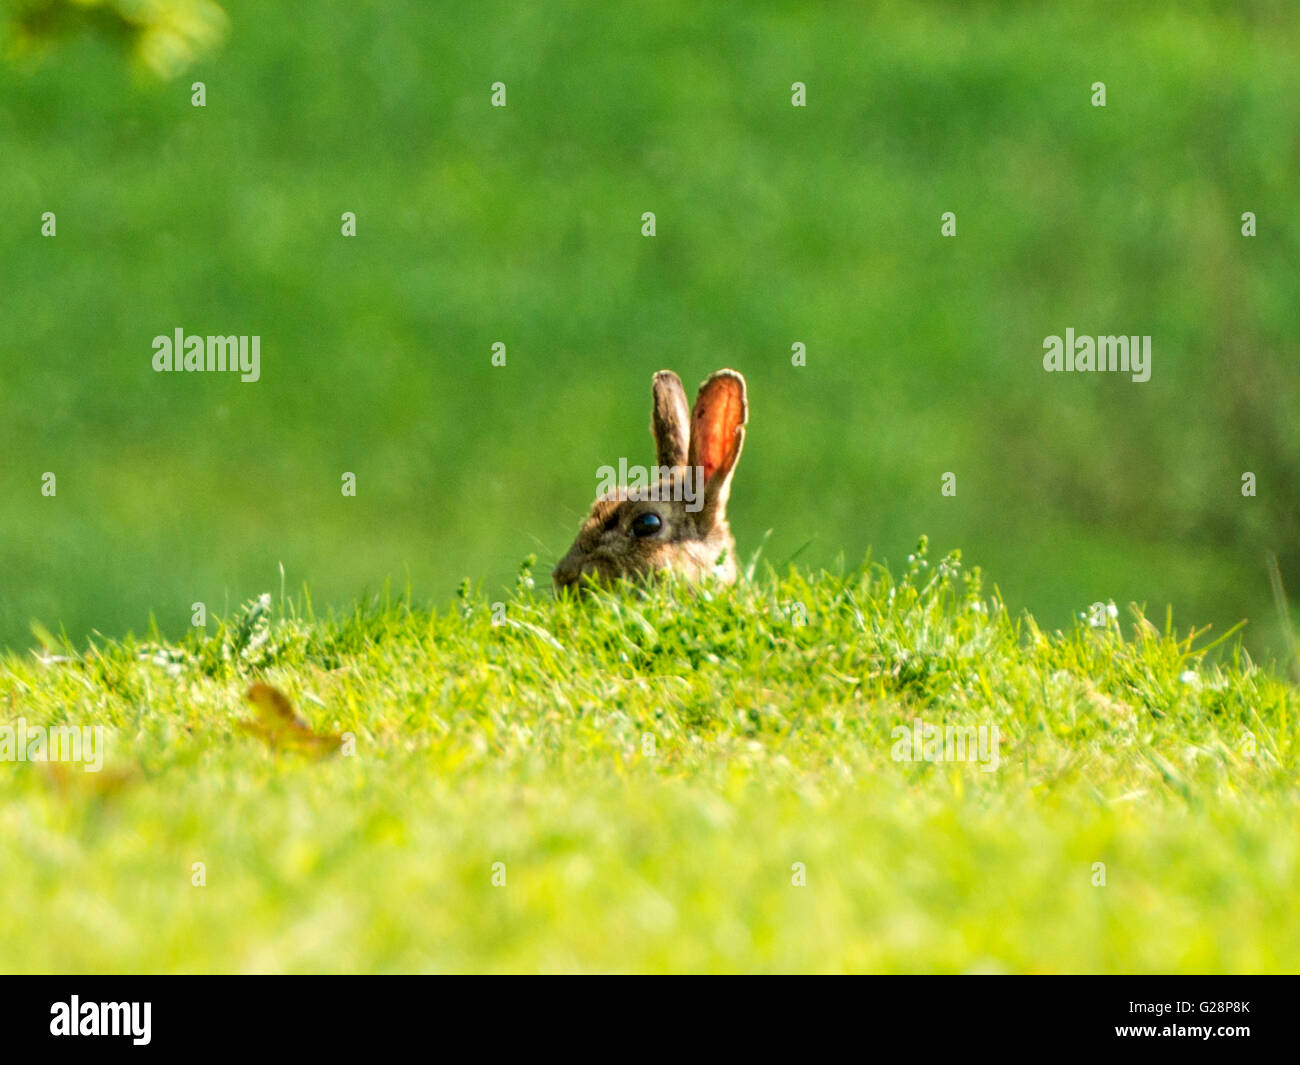 Wild European Rabbit (Oryctolagus cuniculus) depicted surveying its surroundings, isolated against green grass background. Stock Photo